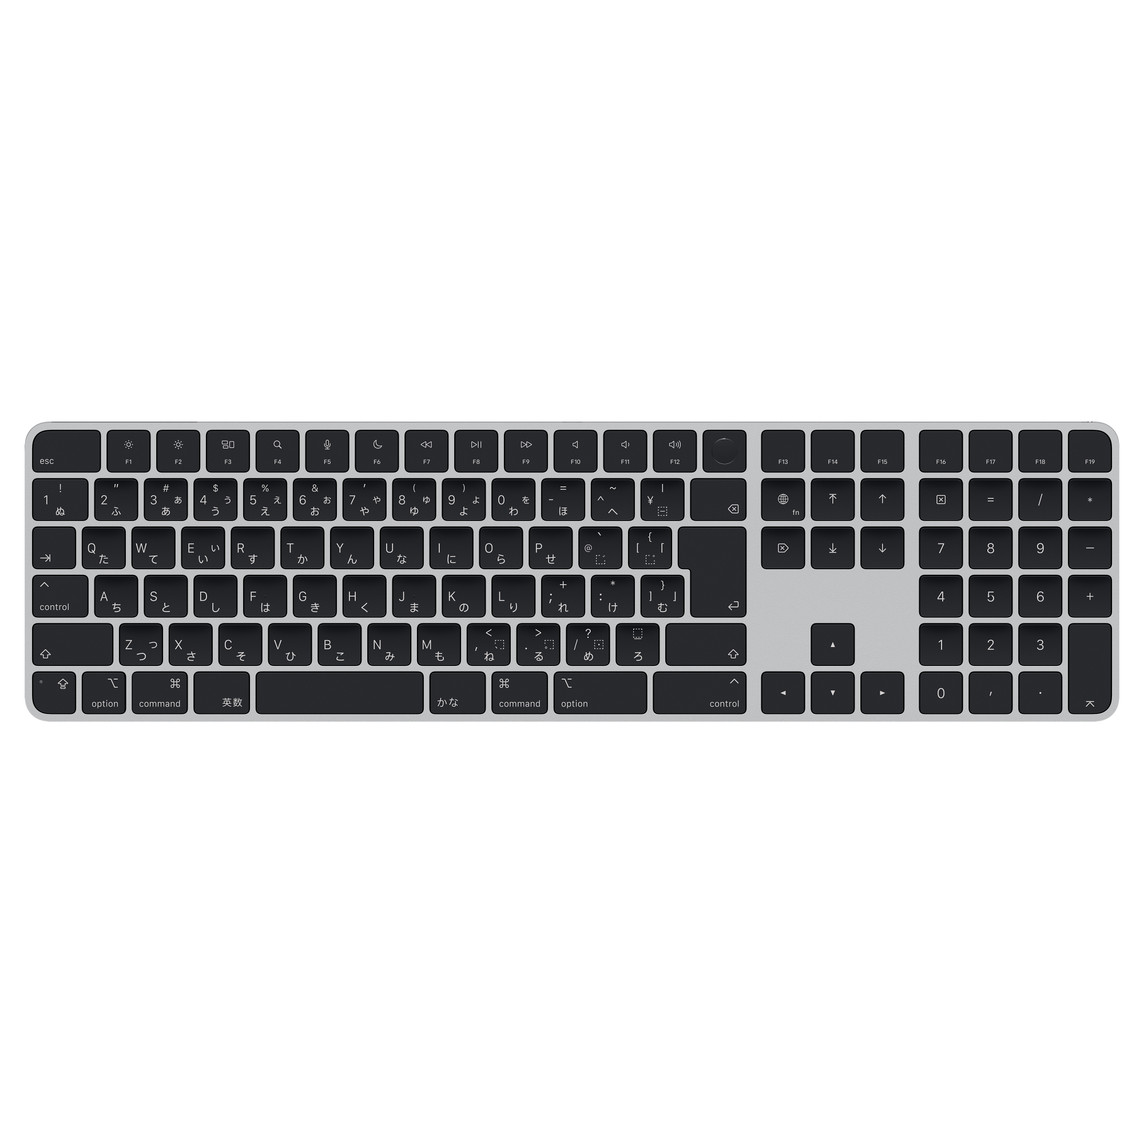 Magic Keyboard with Numeric Keypad in black, featuring an inverted T arrow key layout, 6-pack of navigation keys, globe and fn key, delete, home, end, page up, page down